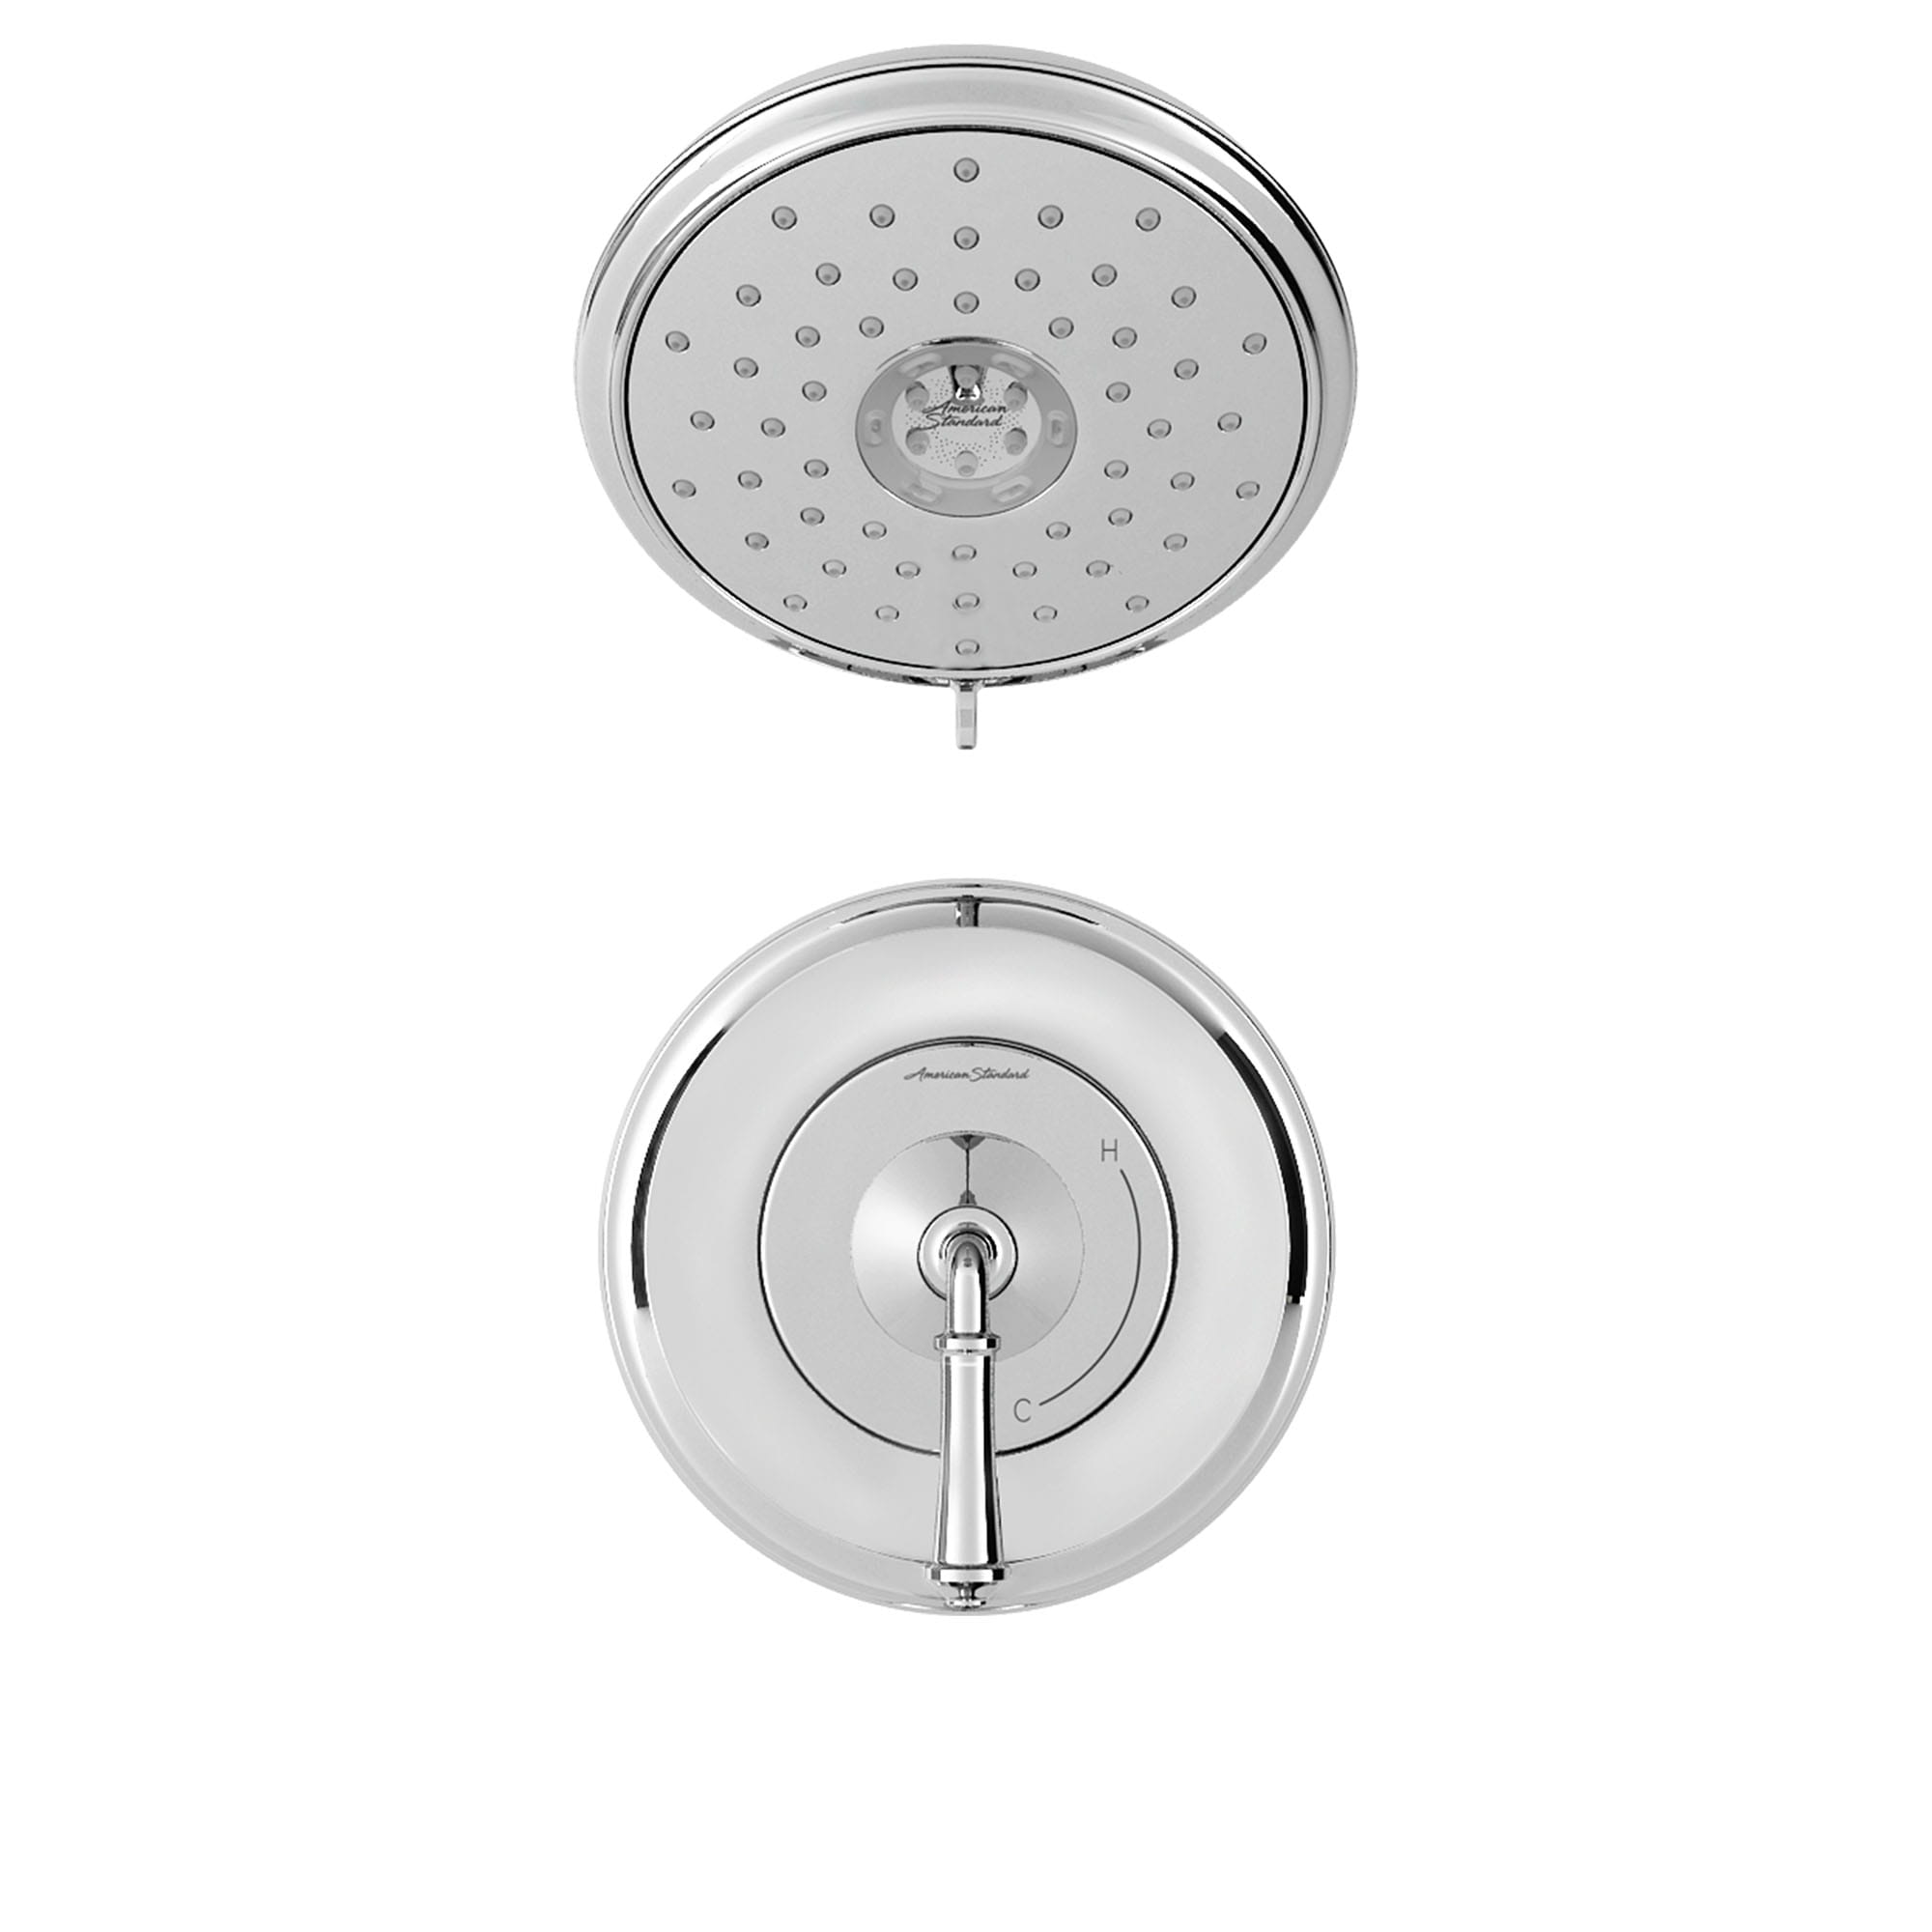 Delancey 18 gpm 68 L min Shower Trim Kit With Water Saving 4 Function Showerhead and Lever Handle CHROME